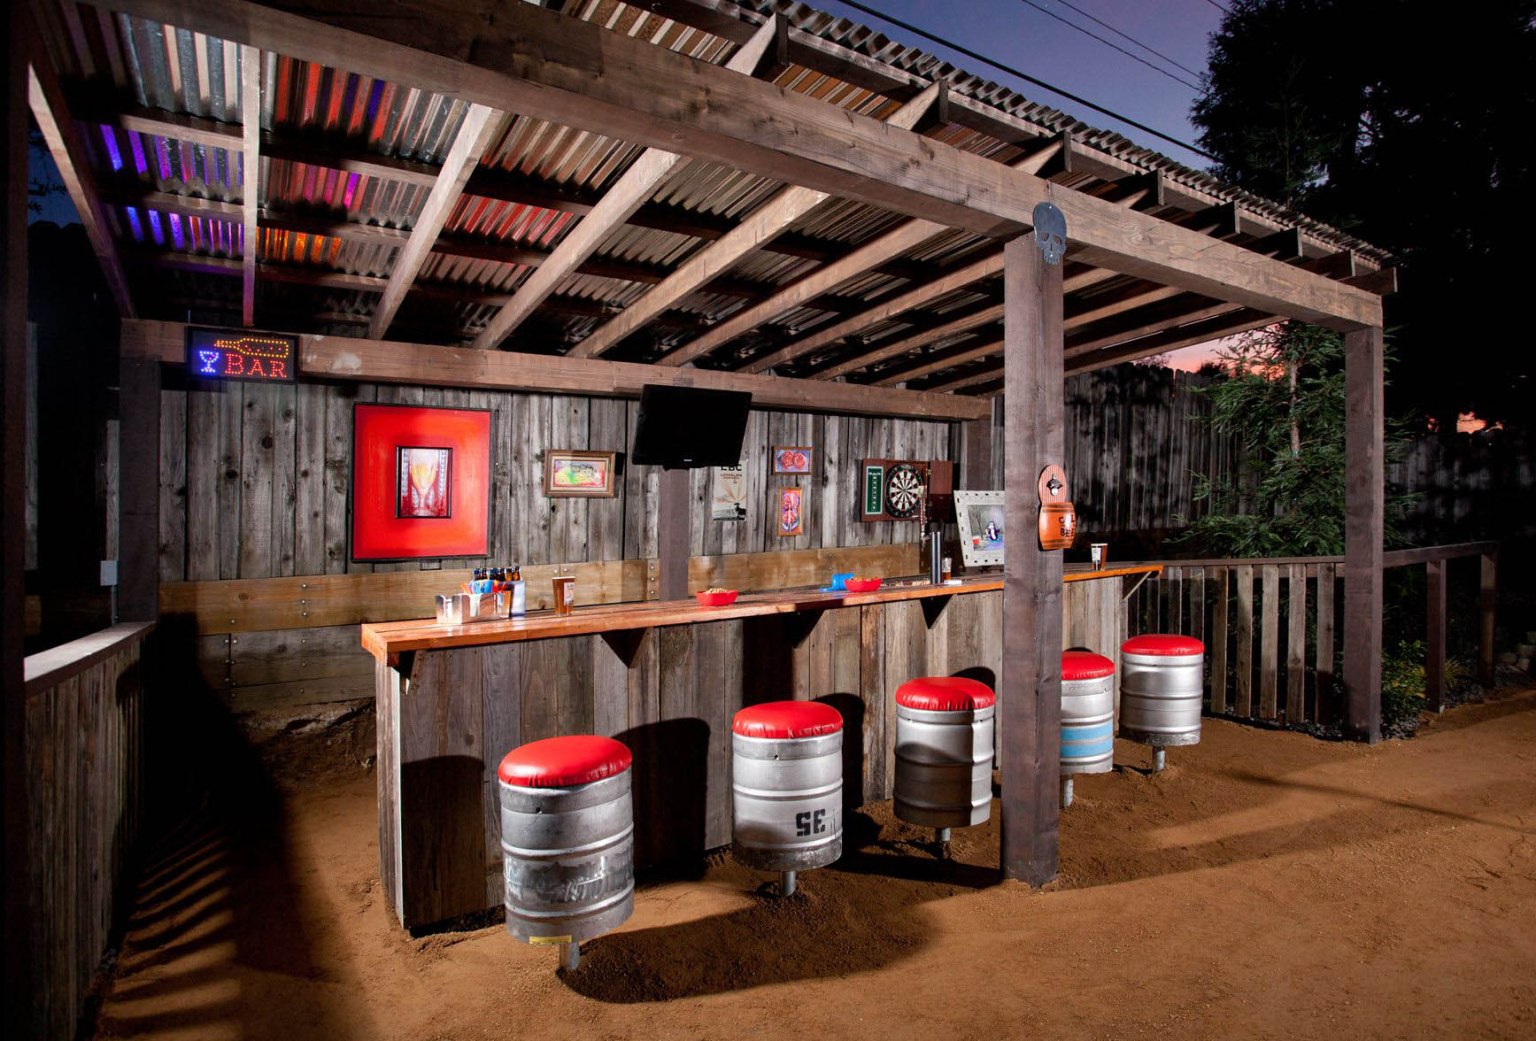 10 Outdoor Bar Ideas from Rustic to Lavish - ARCHLUX.NET